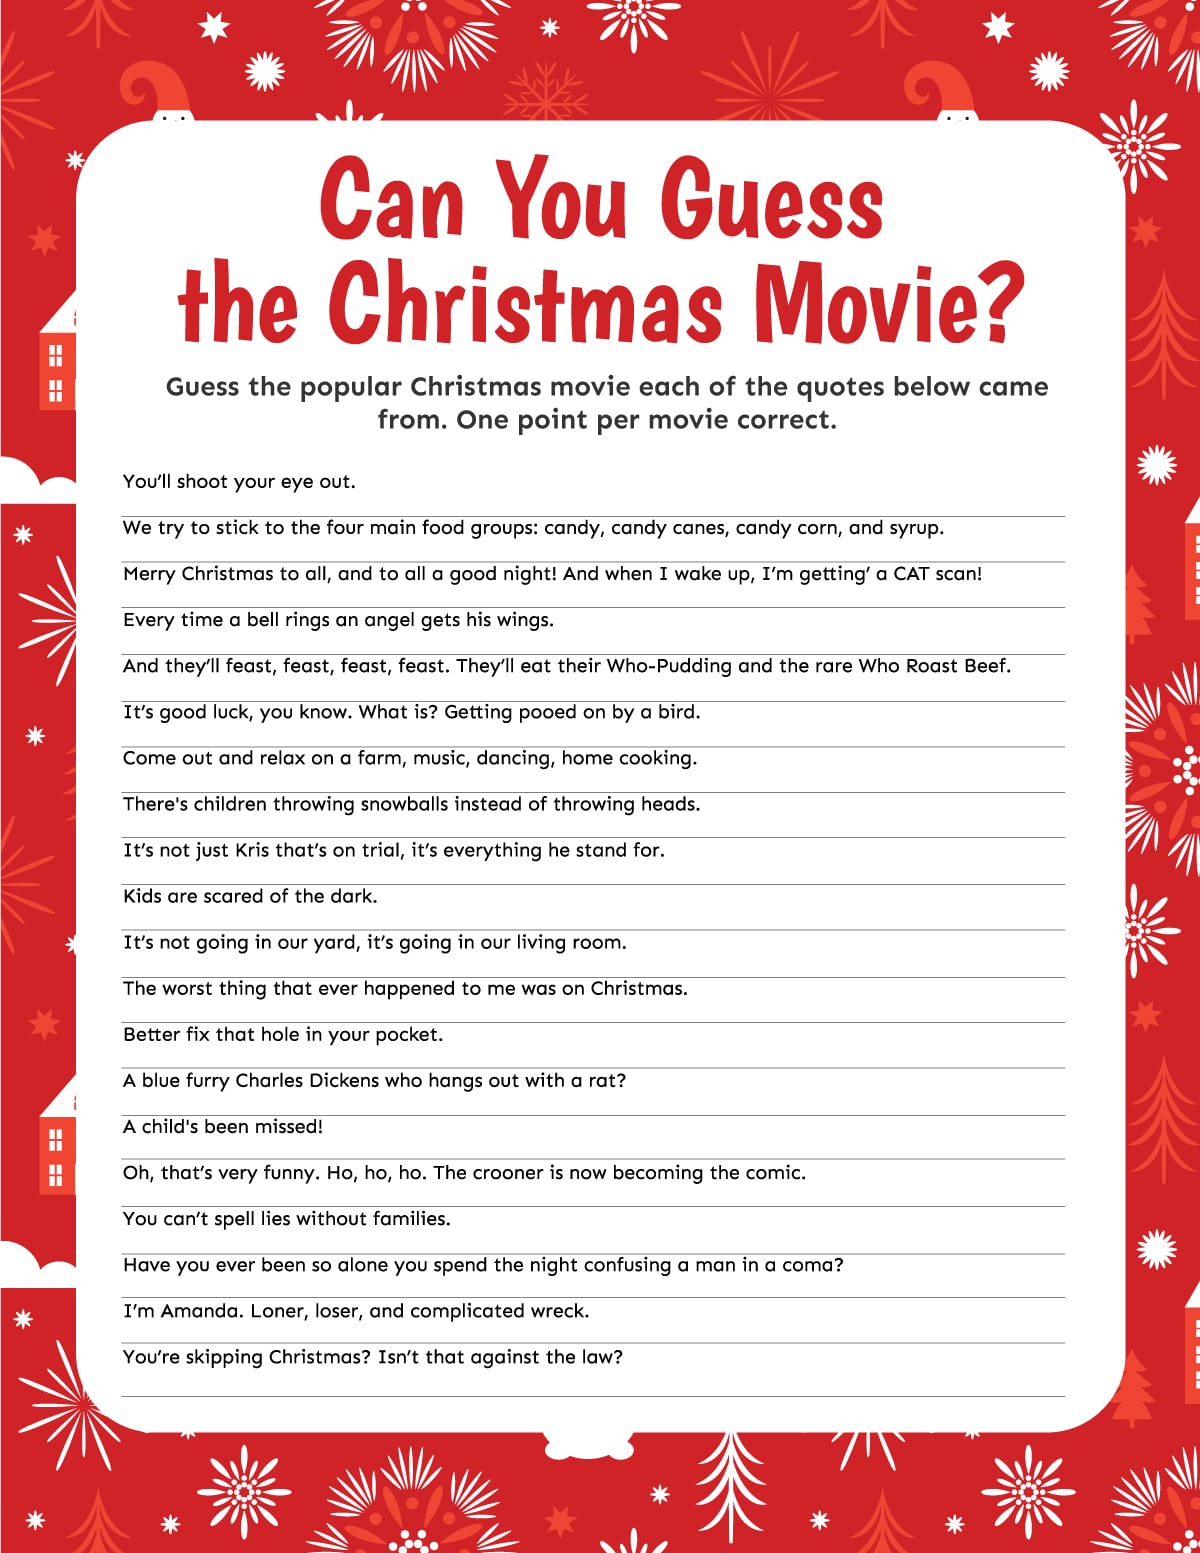 Christmas movie trivia game with a red border